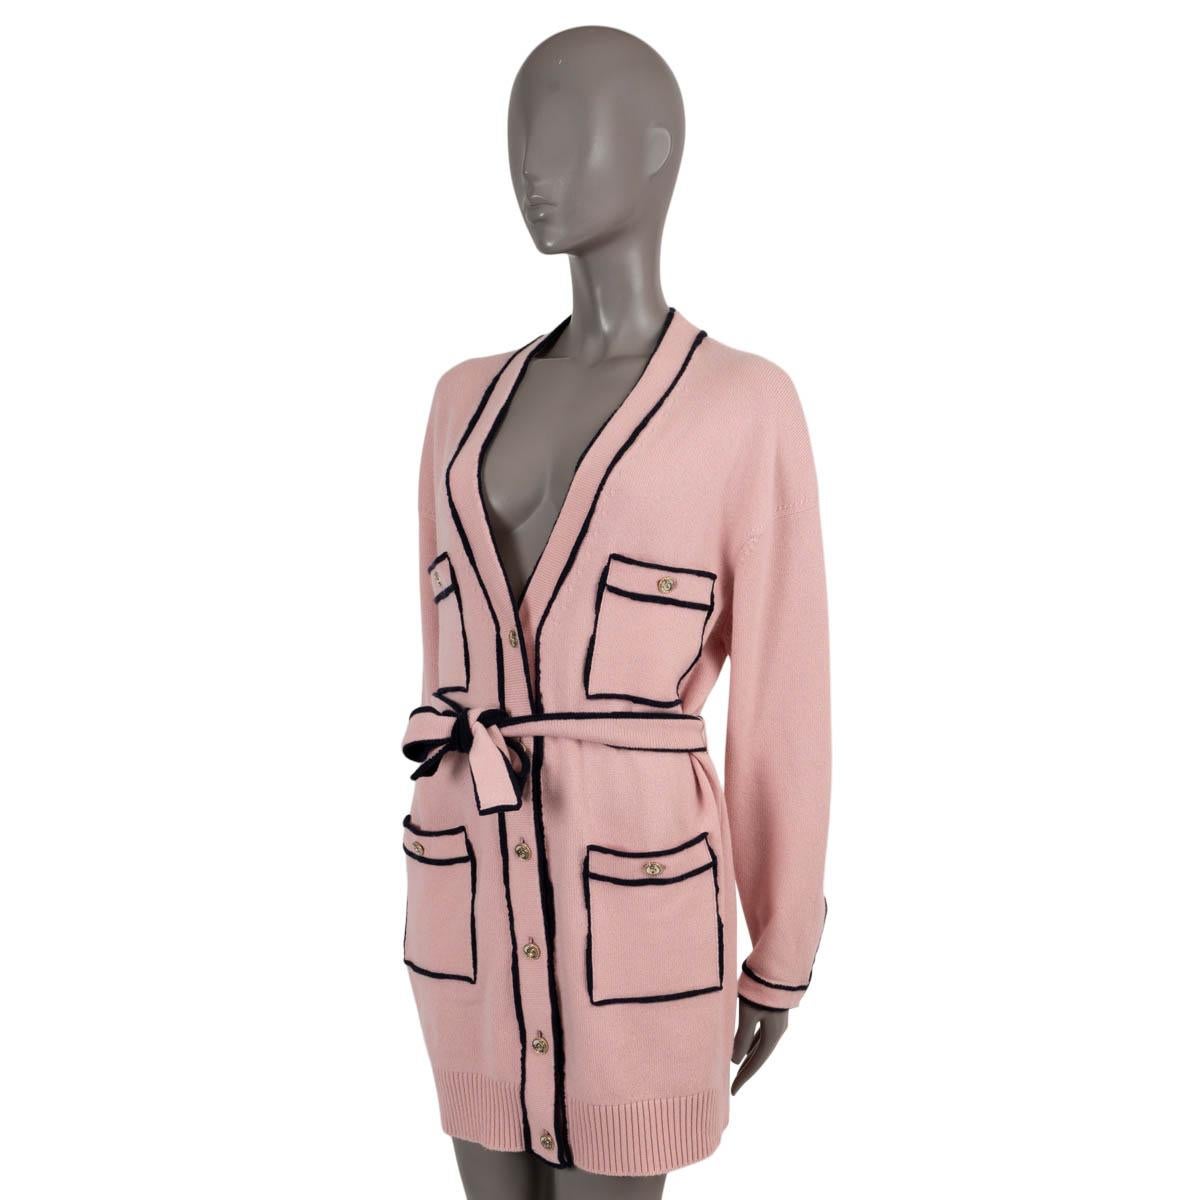 100% authentic Chanel cardigan knit dress in light pink cashmere (100%) with navy blue trims. Features a V-neck, four buttoned flap pockets, rib-knit hem and matching self-tie belt. Opens with No 5 buttons on the front and is unlined. Has been worn